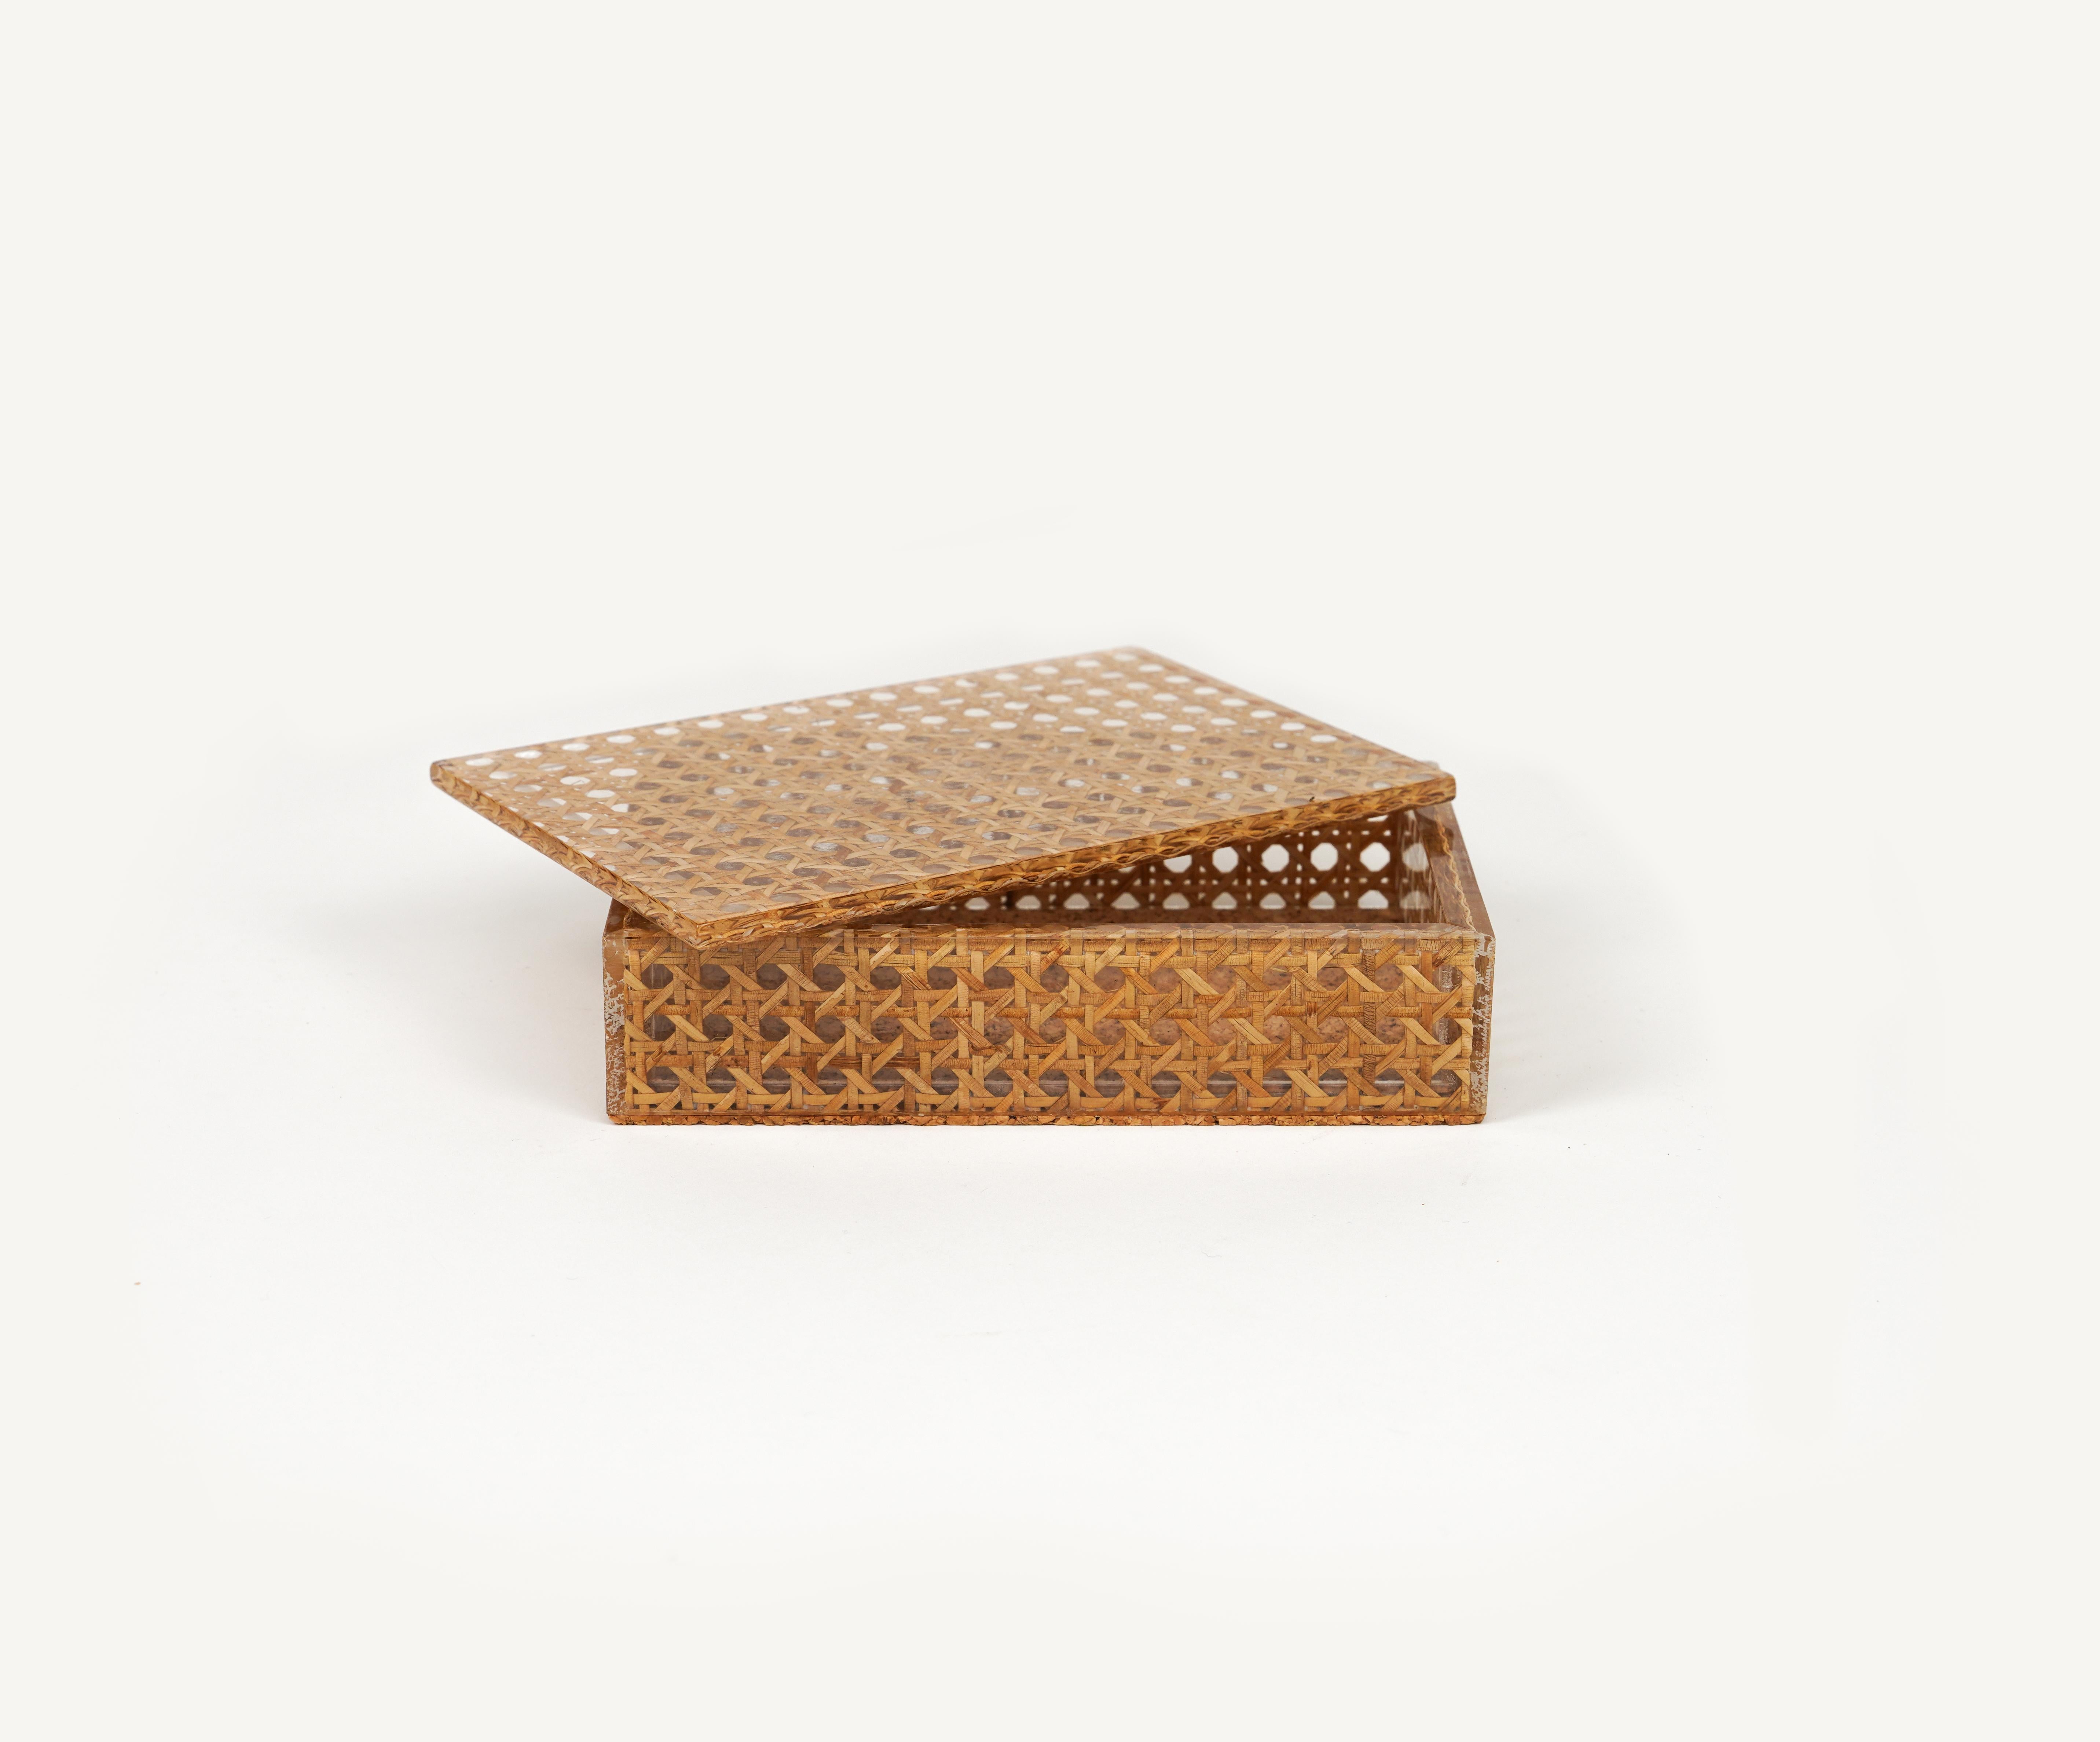 Midcentury Box in Rattan, Lucite and Cork Christian Dior Style, Italy 1970s For Sale 2